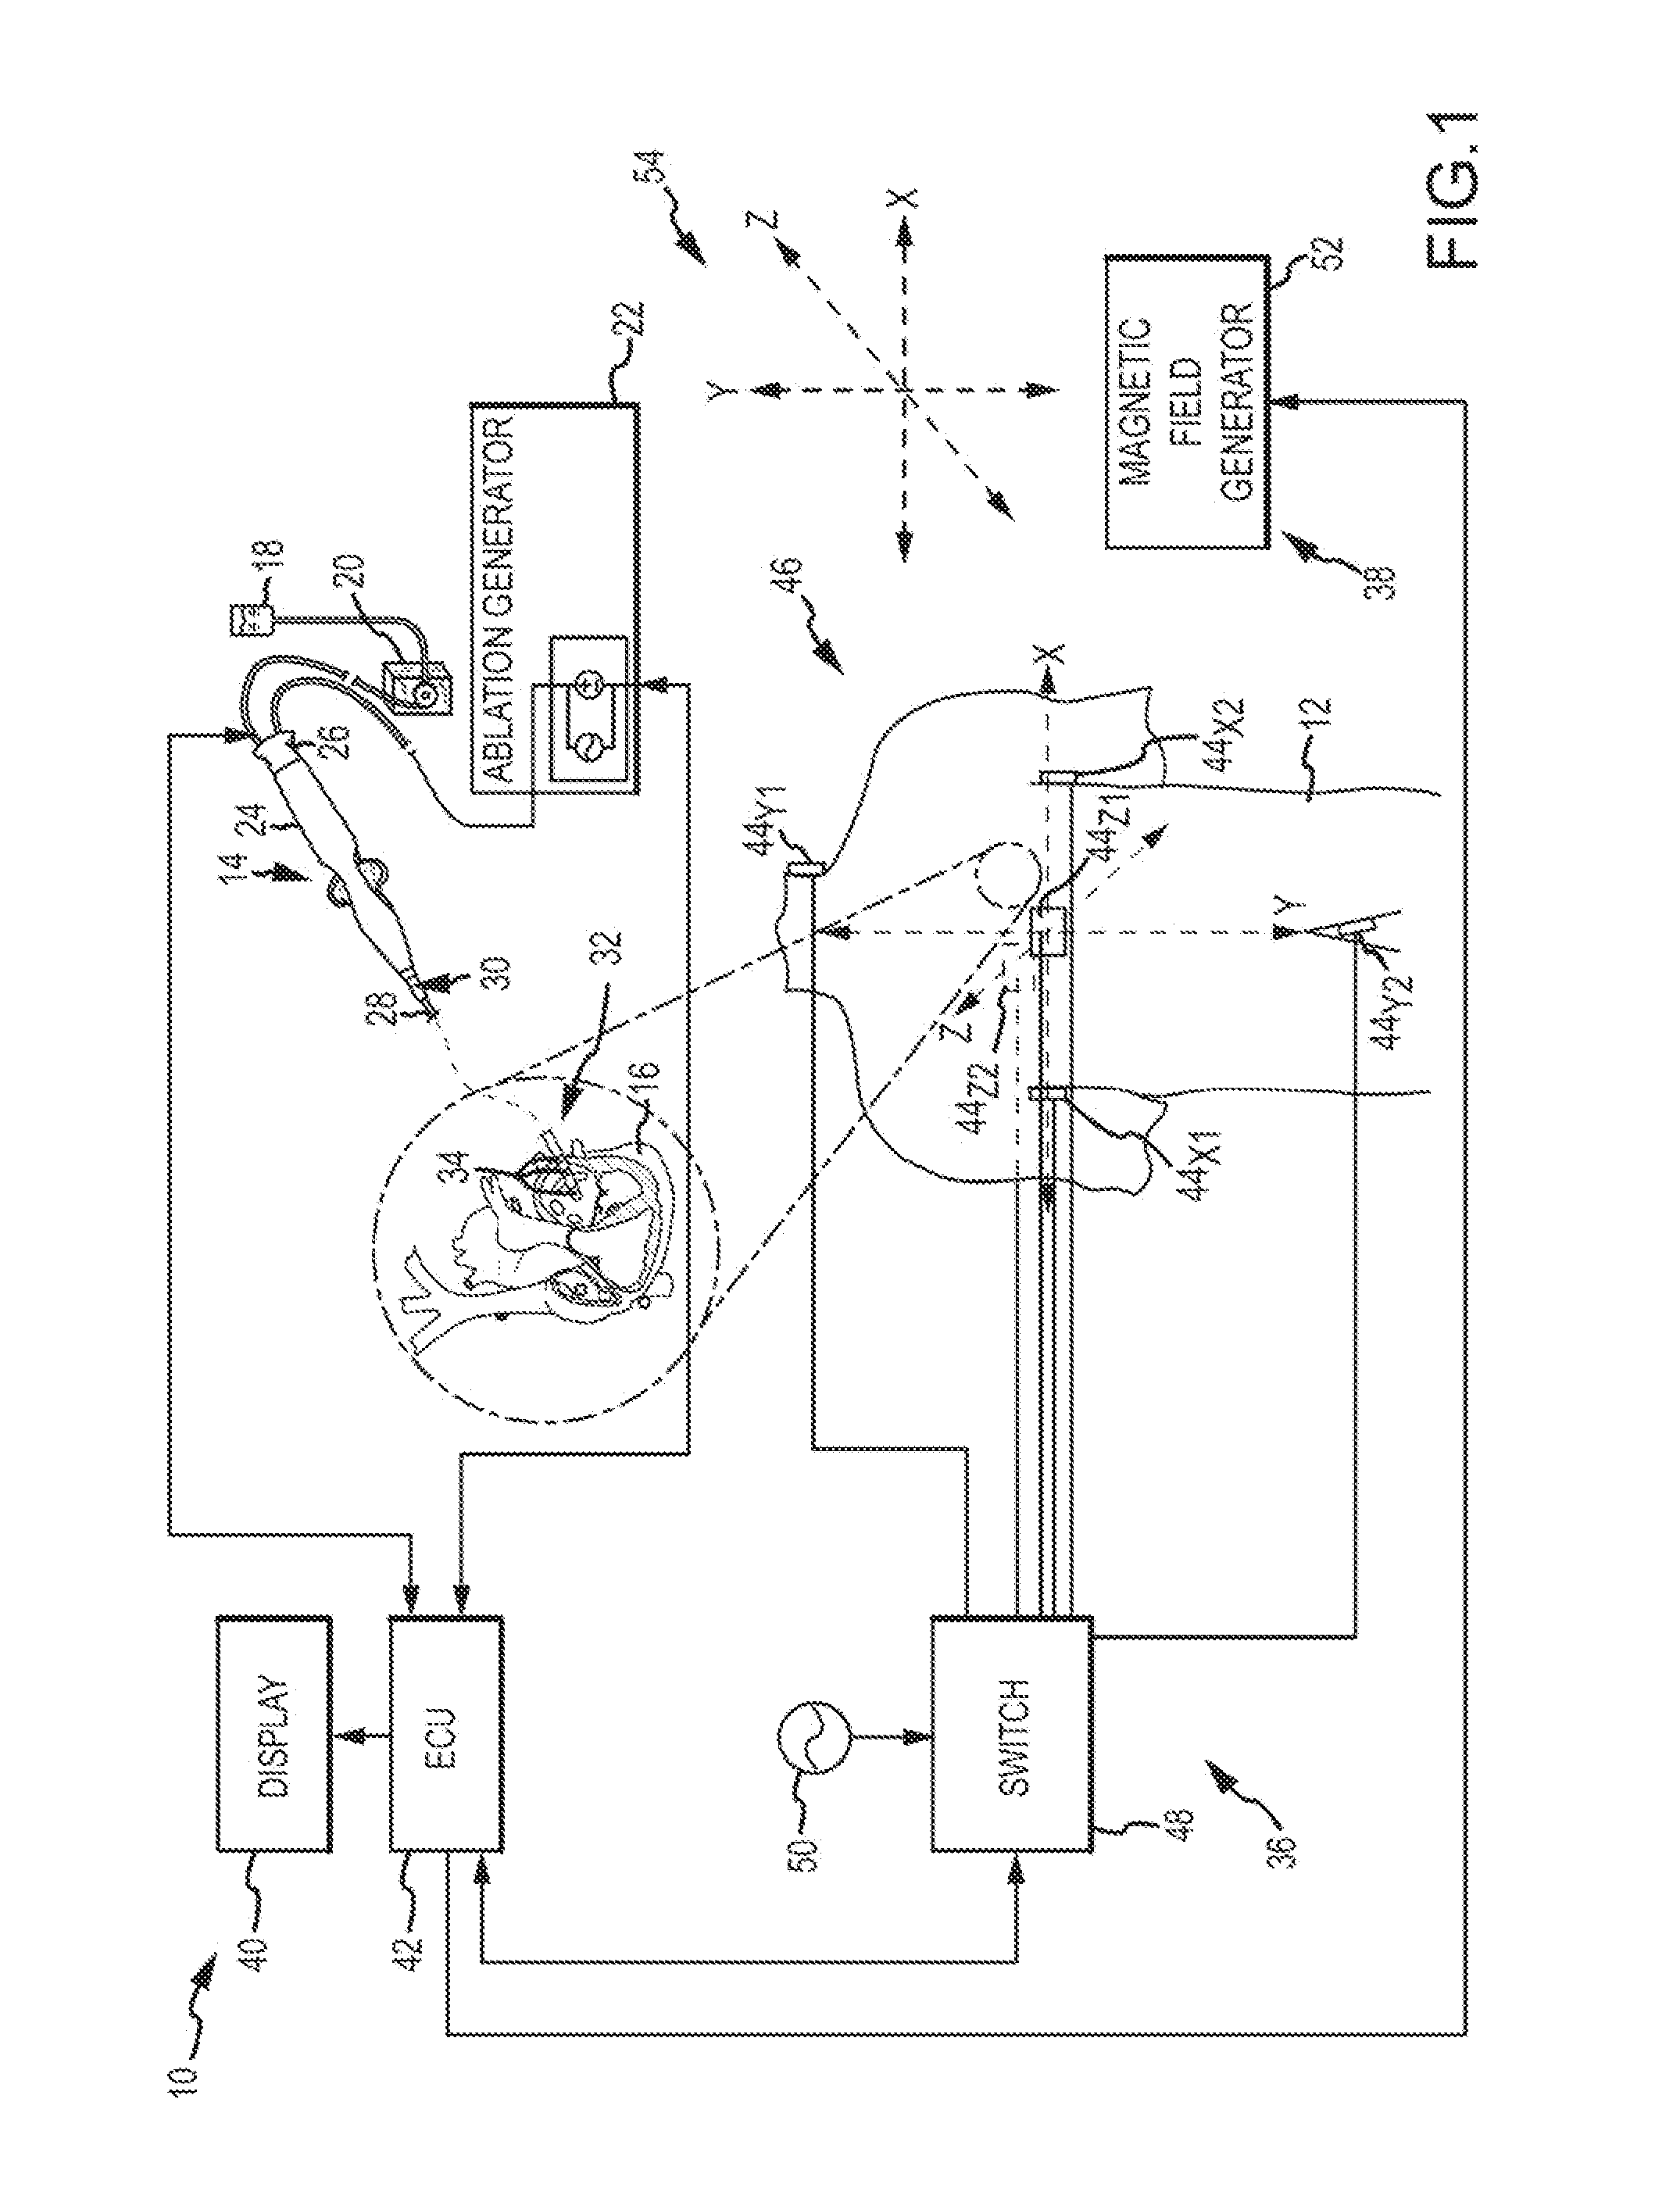 System for detecting catheter electrodes entering into and exiting from an introducer